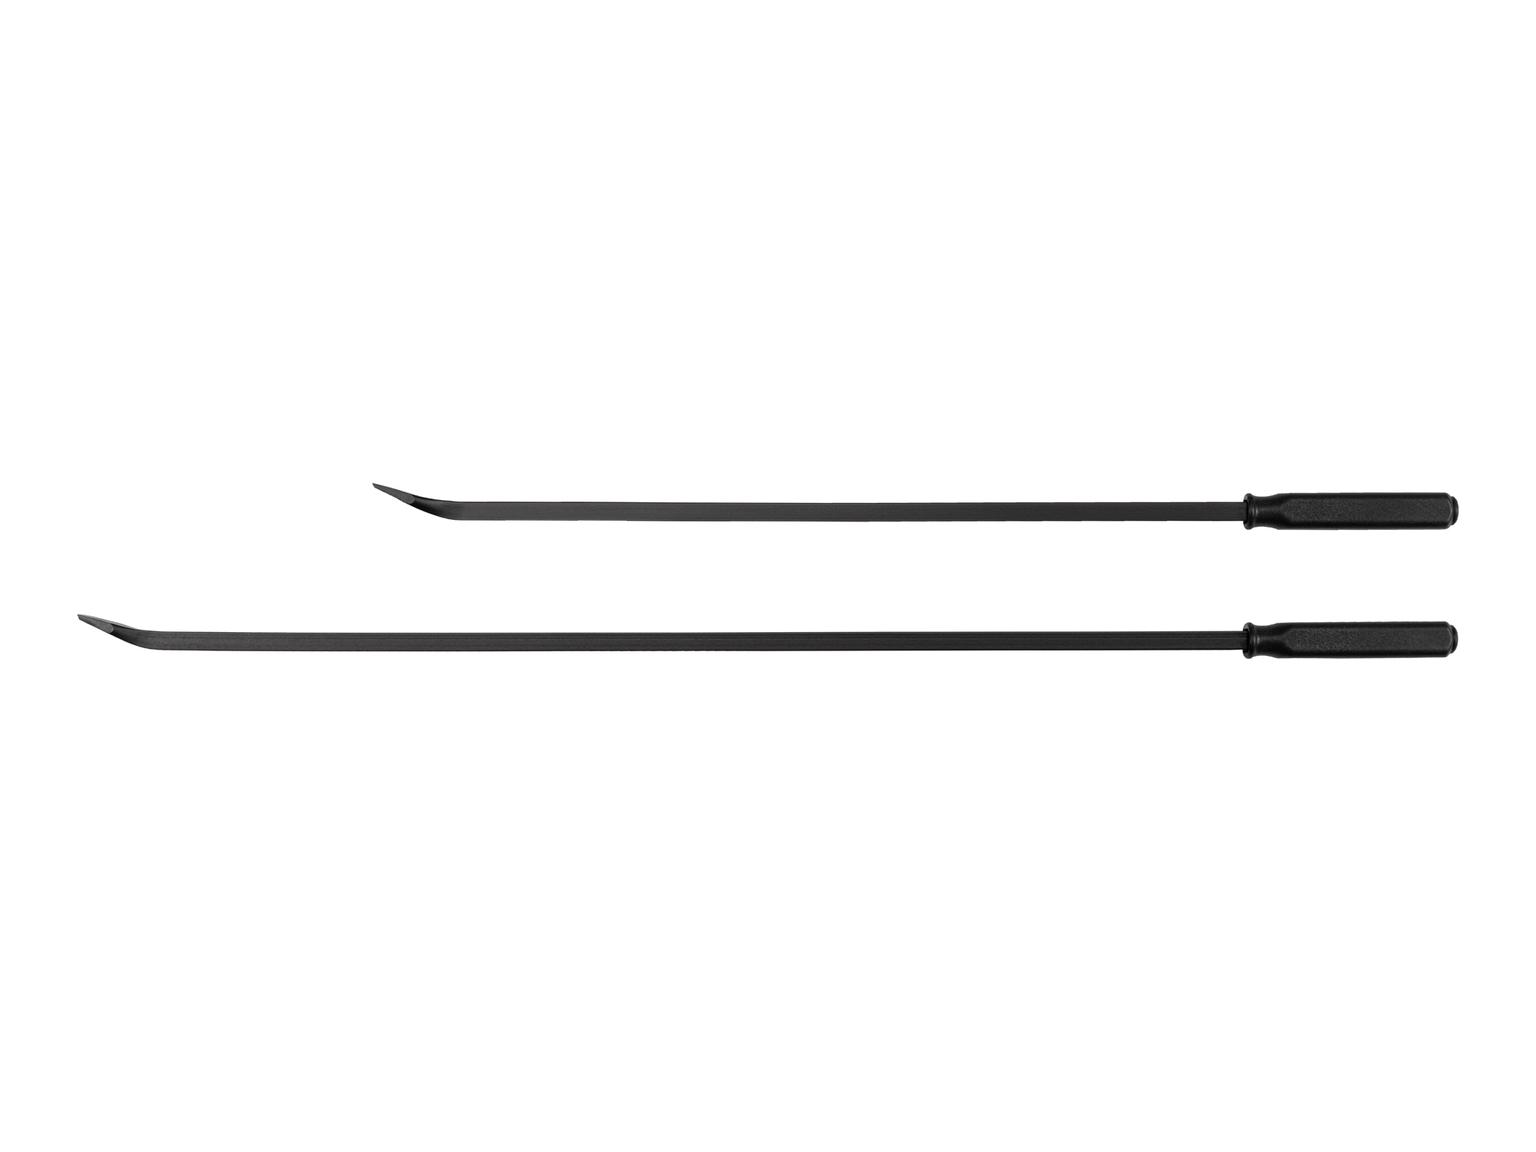 TEKTON LSQ90504-T Angled End Handled Pry Bar Set, 2-Piece (36, 45 in.)